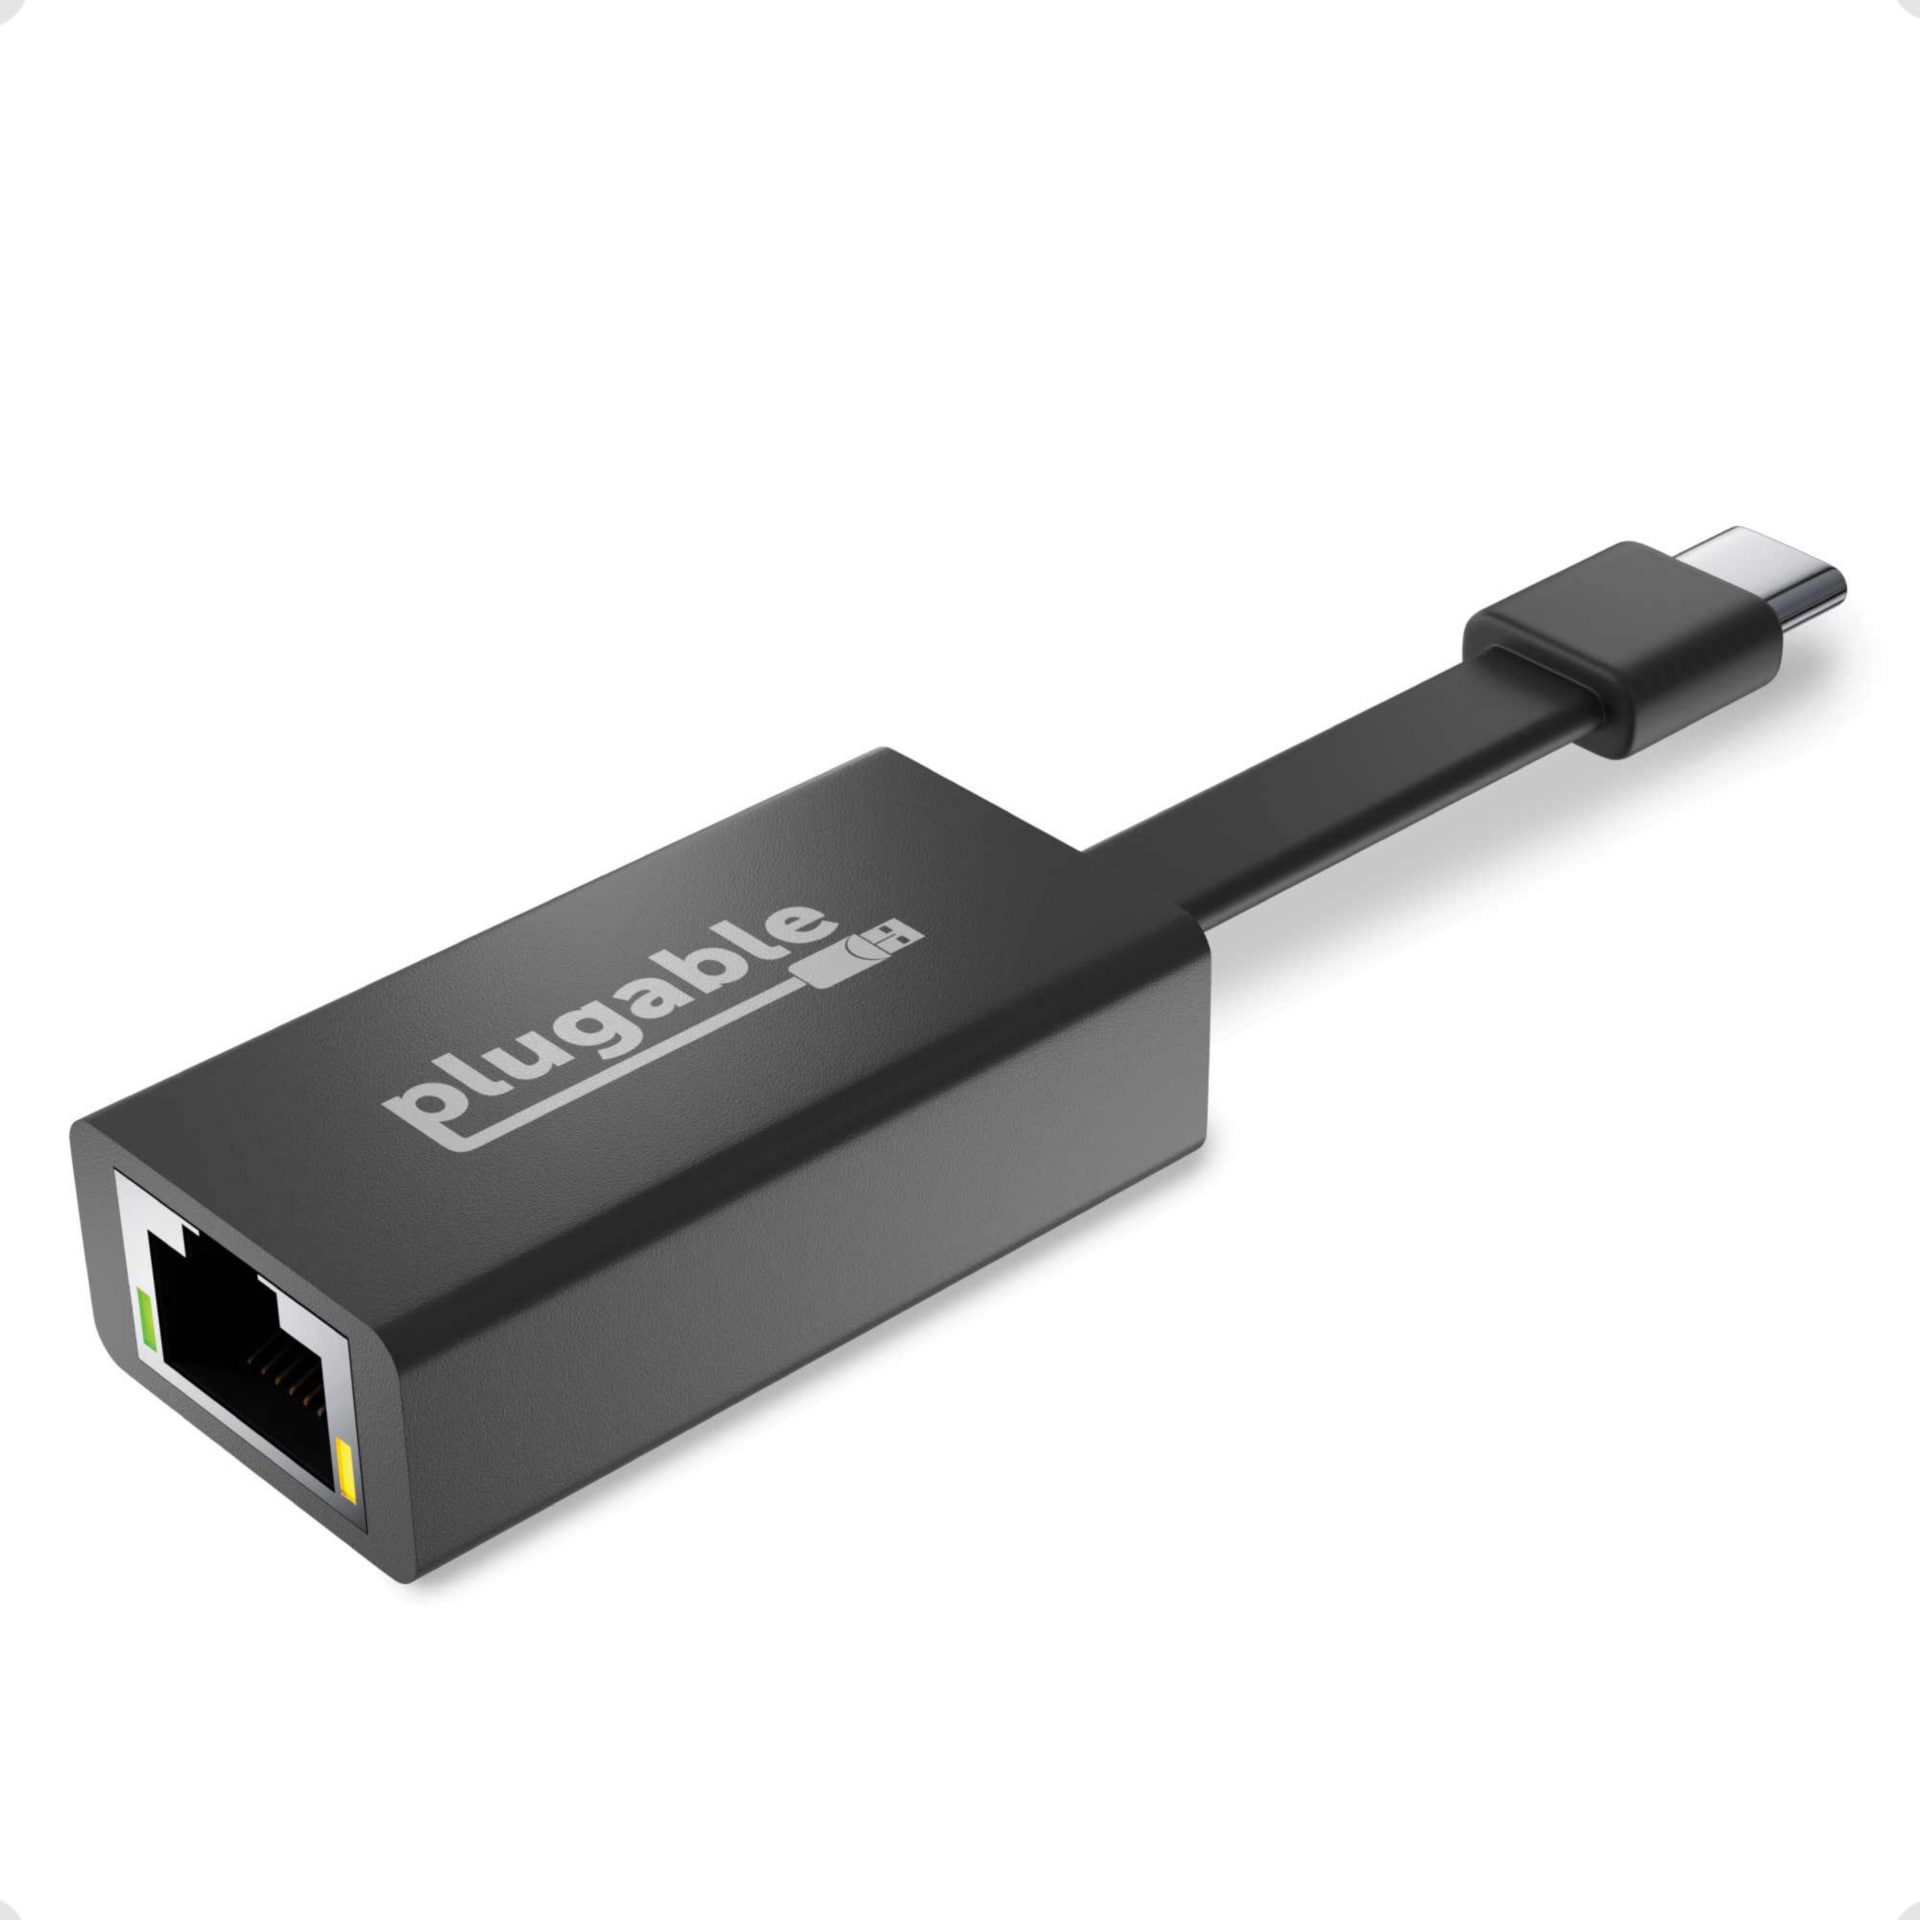 Firestick Ethernet Adapter for Increased Speed & Connection